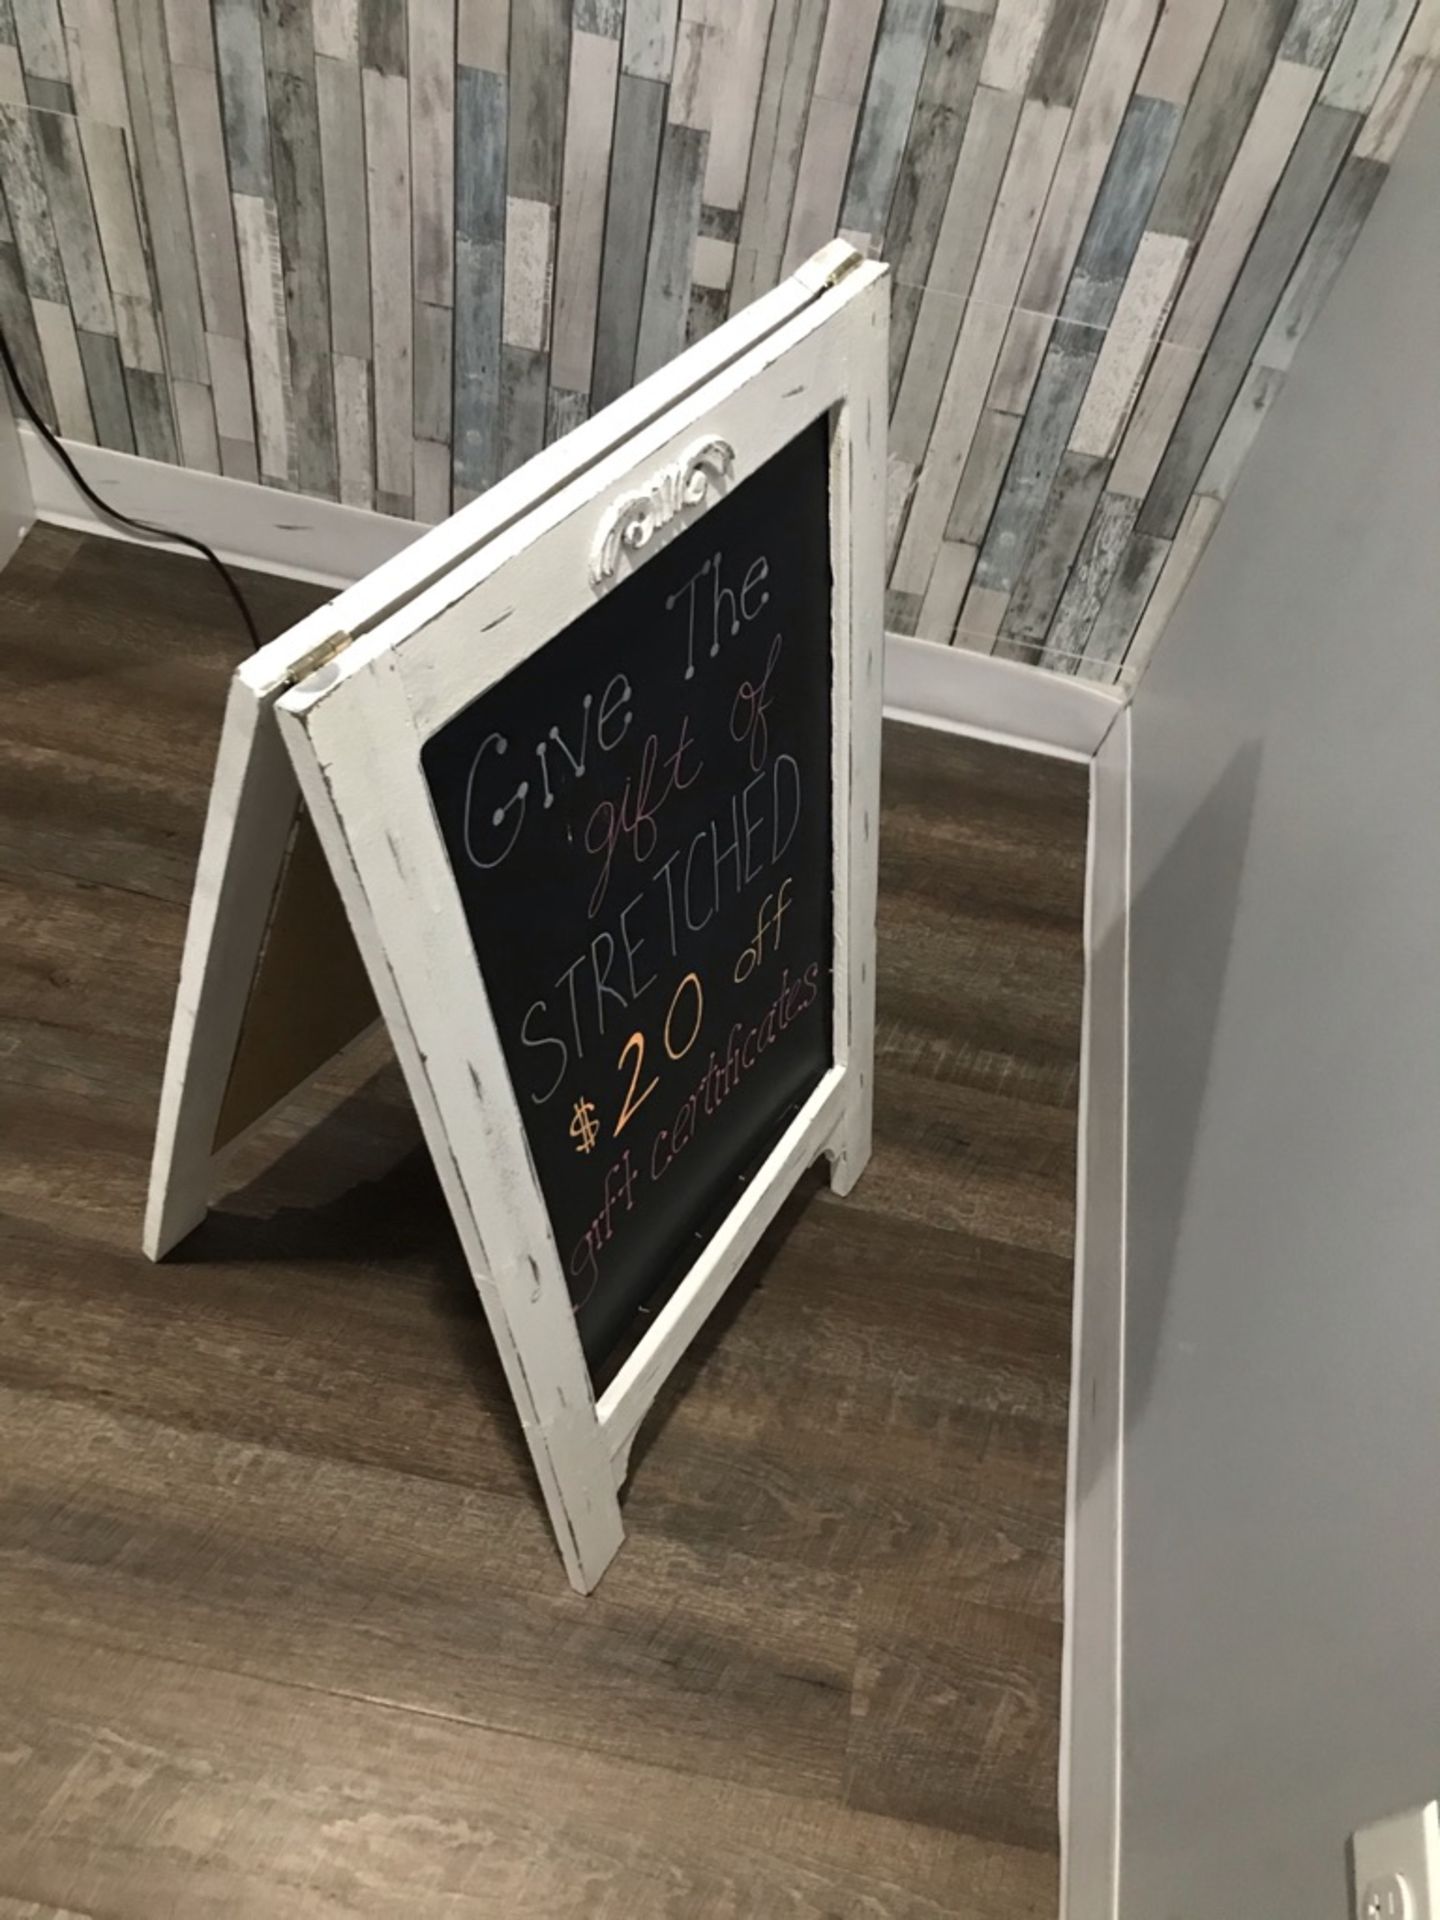 A-FRAME ADVERTISING BOARD, CHALKBOARD SURFACE, APPROX 24" HIGH - Image 2 of 4